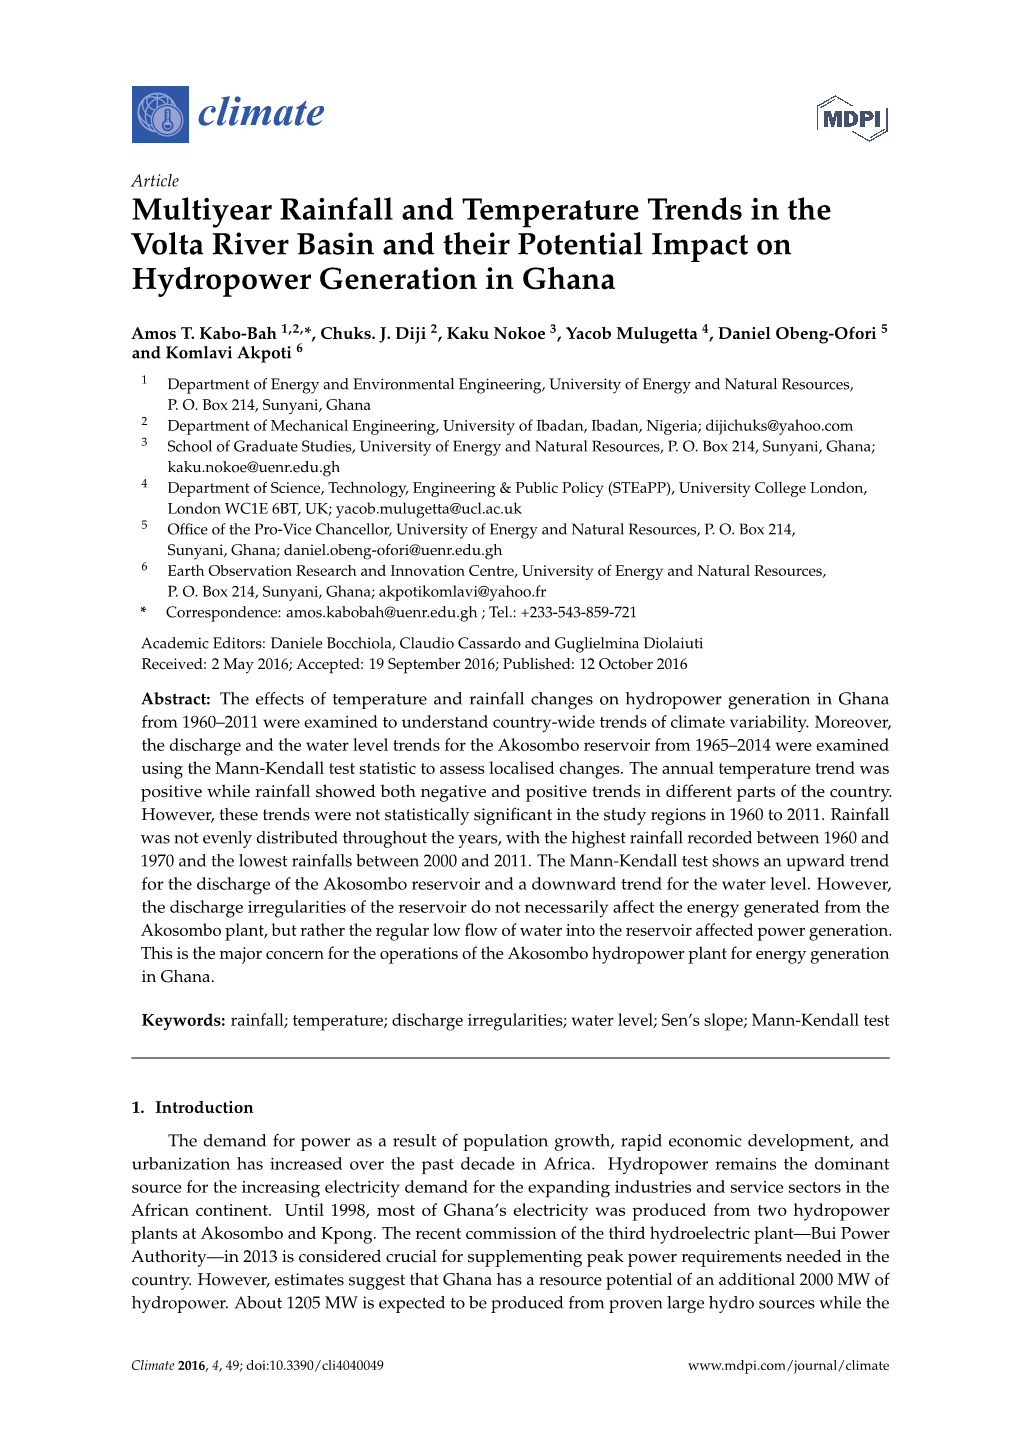 Multiyear Rainfall and Temperature Trends in the Volta River Basin and Their Potential Impact on Hydropower Generation in Ghana